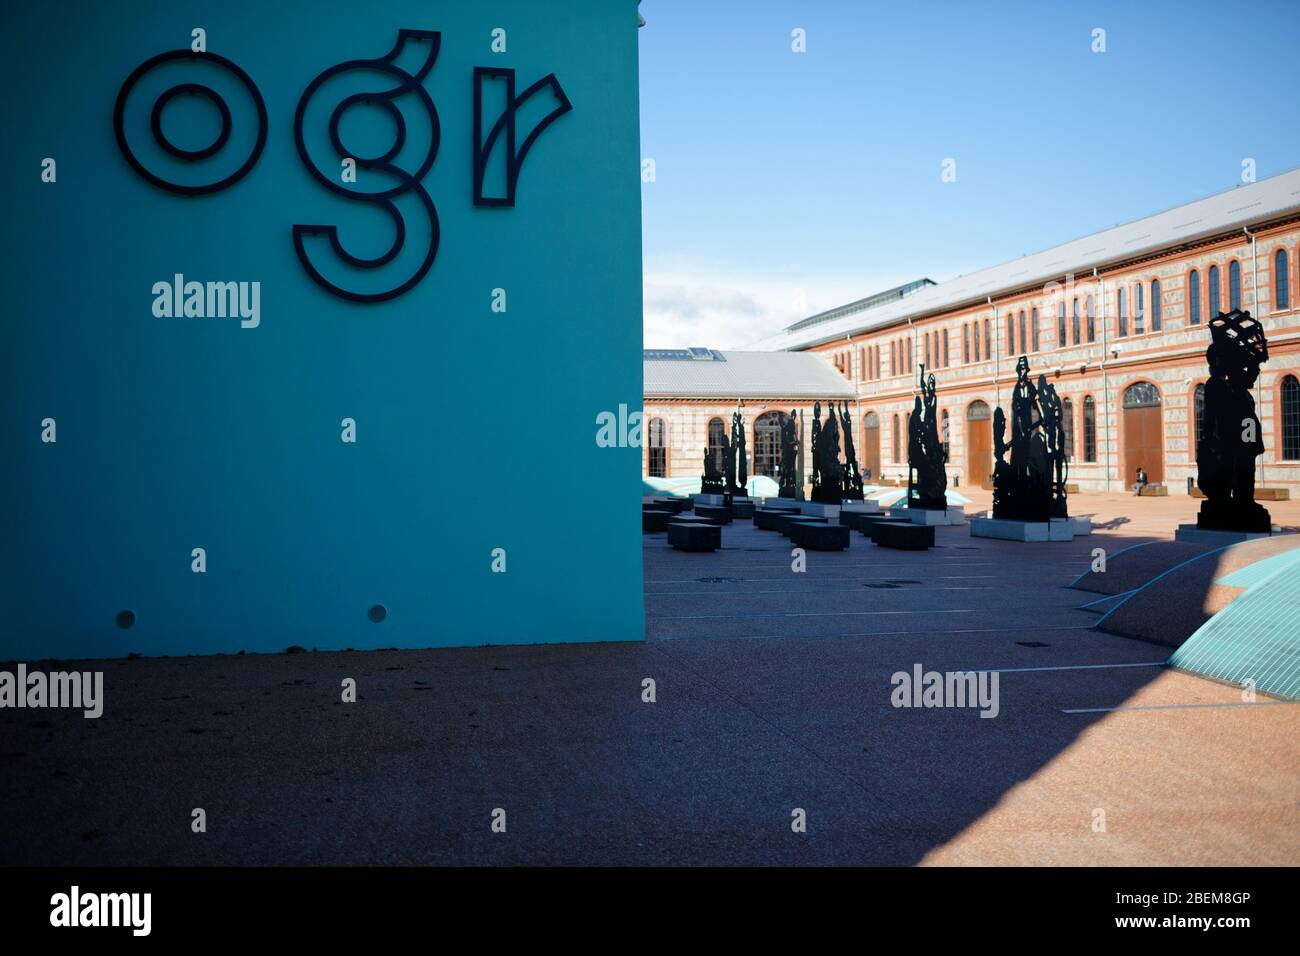 Outdoor spaces of OGR , a late XIX century facility now partially used for the treatment of COVID-19 patients. Credit: MLBARIONA/Alamy Stock Photo. Stock Photo